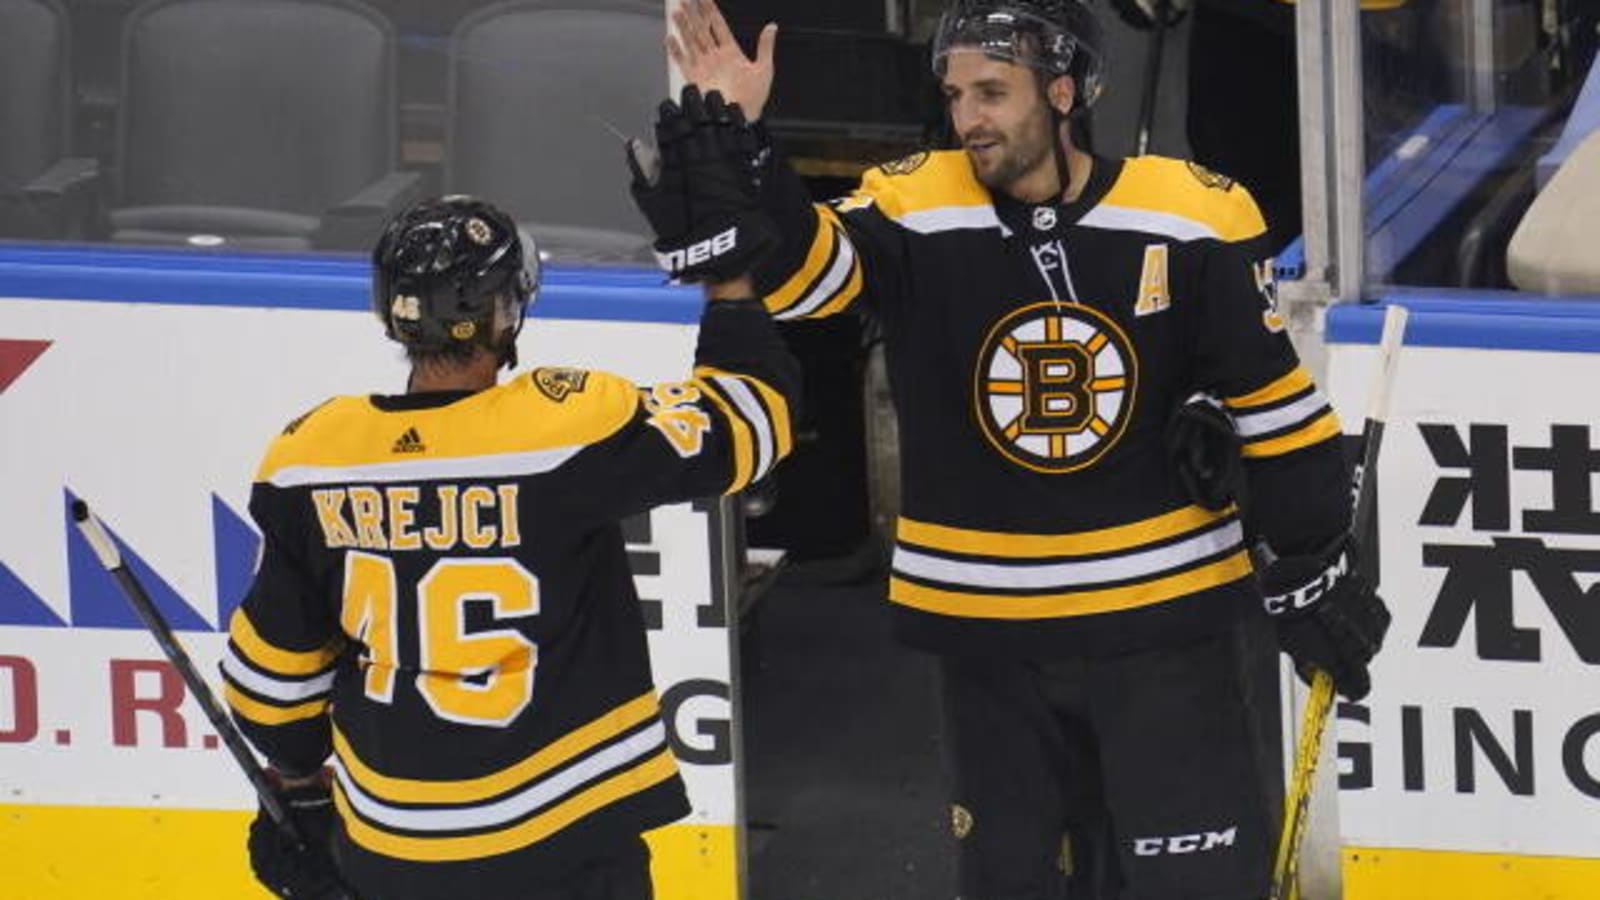 NHL News: Bruins Lock Up Bergeron, Krejci and Zacha and are Now Over the Cap